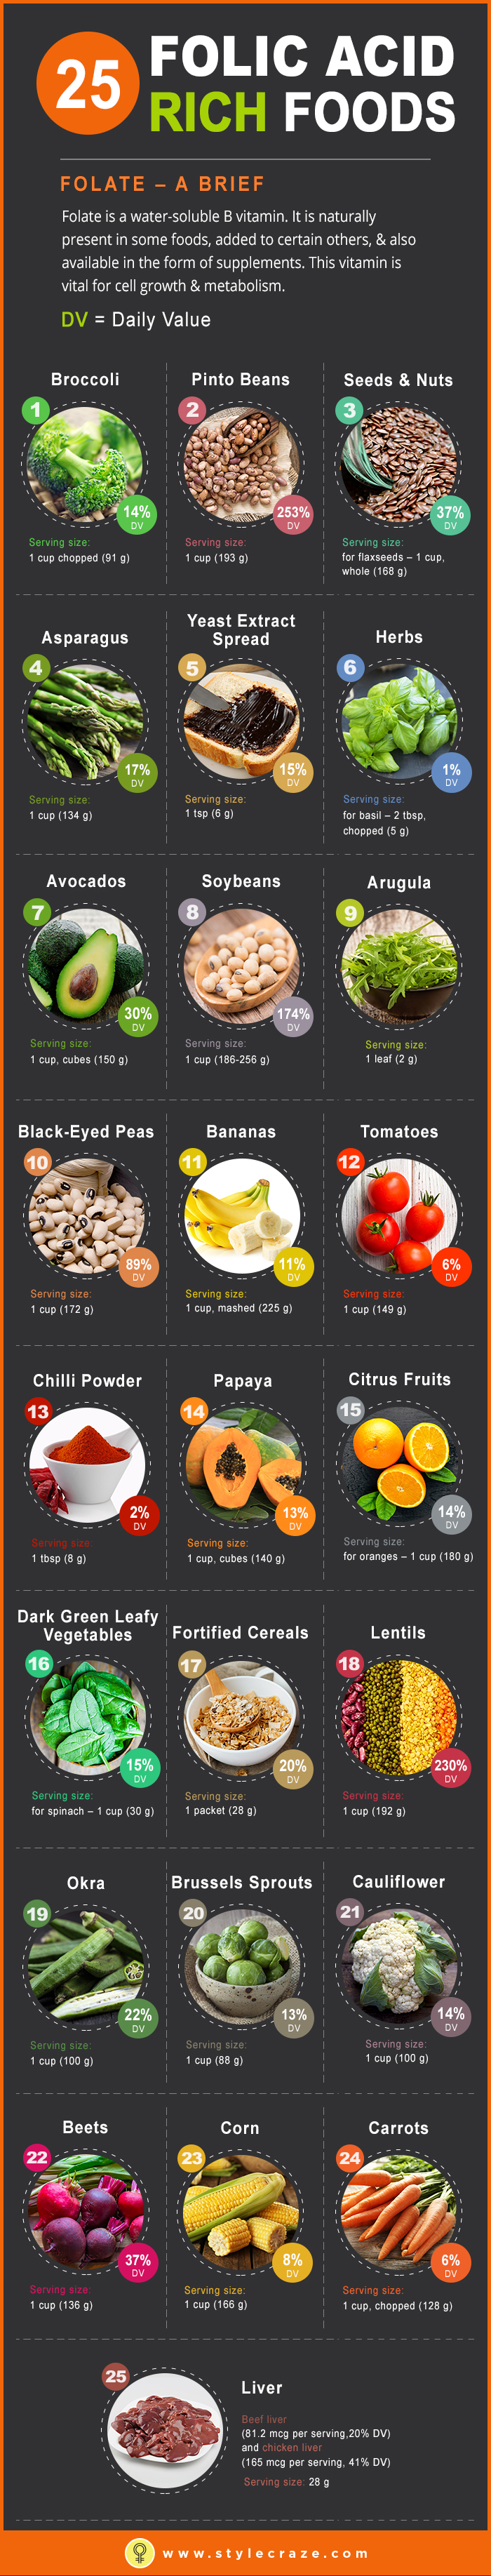 Top 25 Foods High In Folic Acid To Include In Your Diet